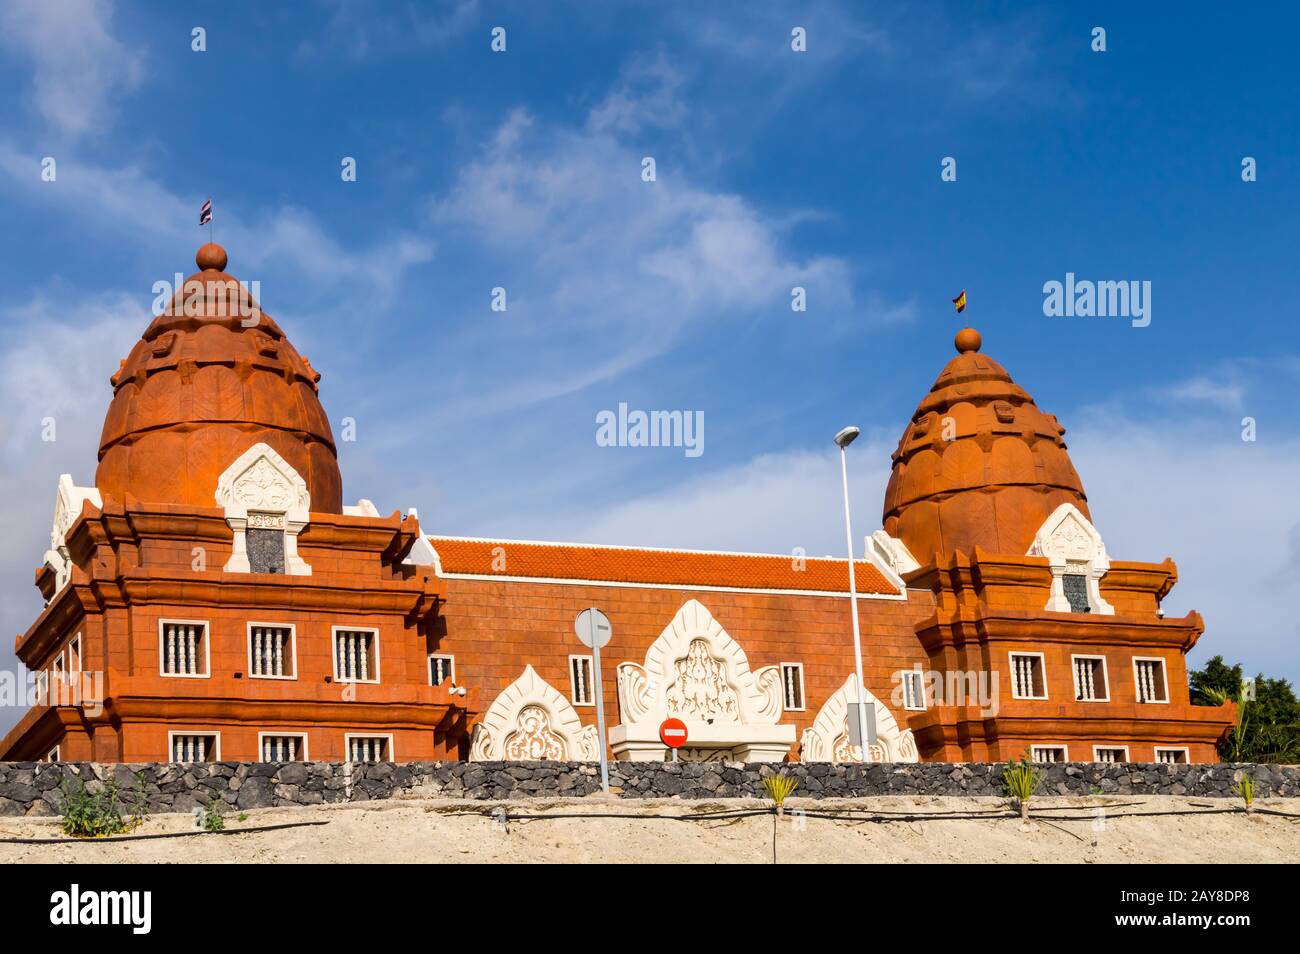 Thai-inspired architecture building with two domes Stock Photo